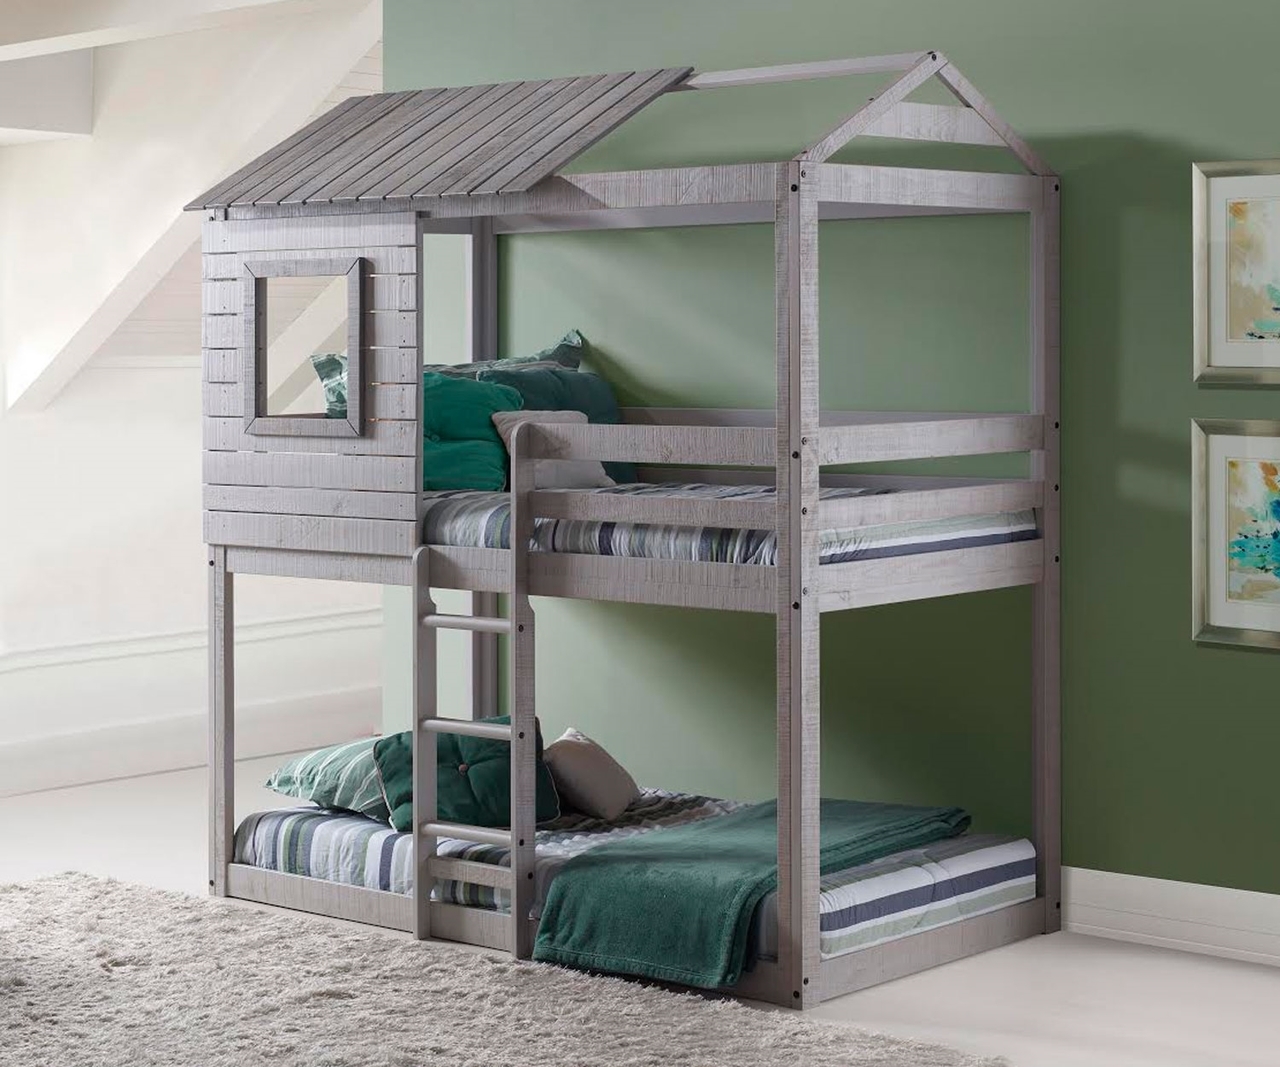 The Best Kids Twin Over Bunk Beds, Twin Bunk Beds For Boys